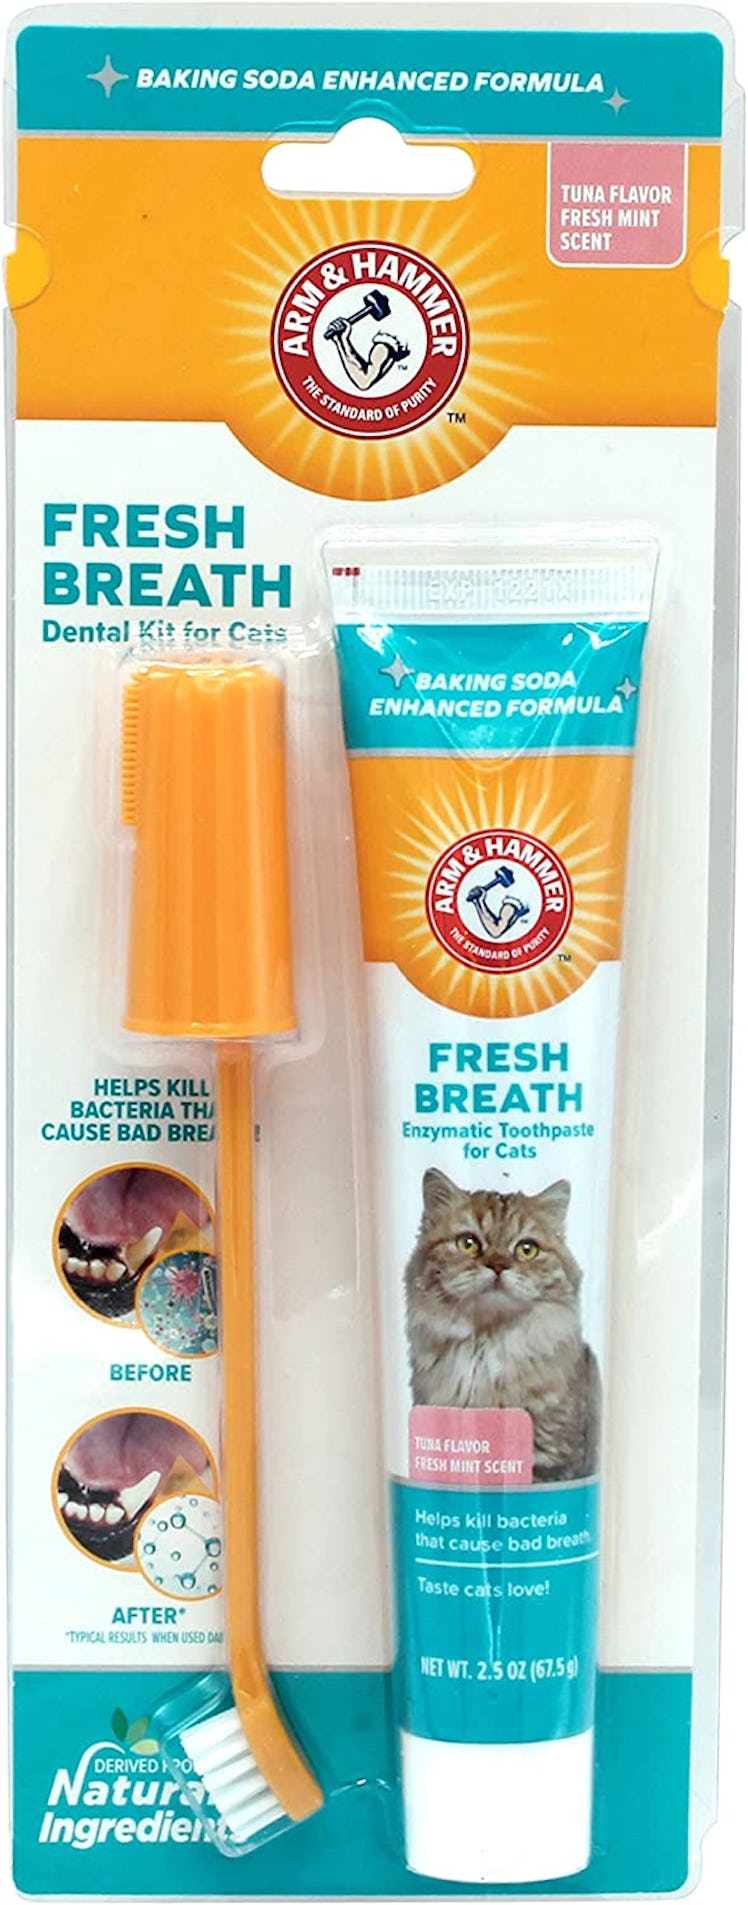 Arm & Hammer for Pets Dental Kit for Cats